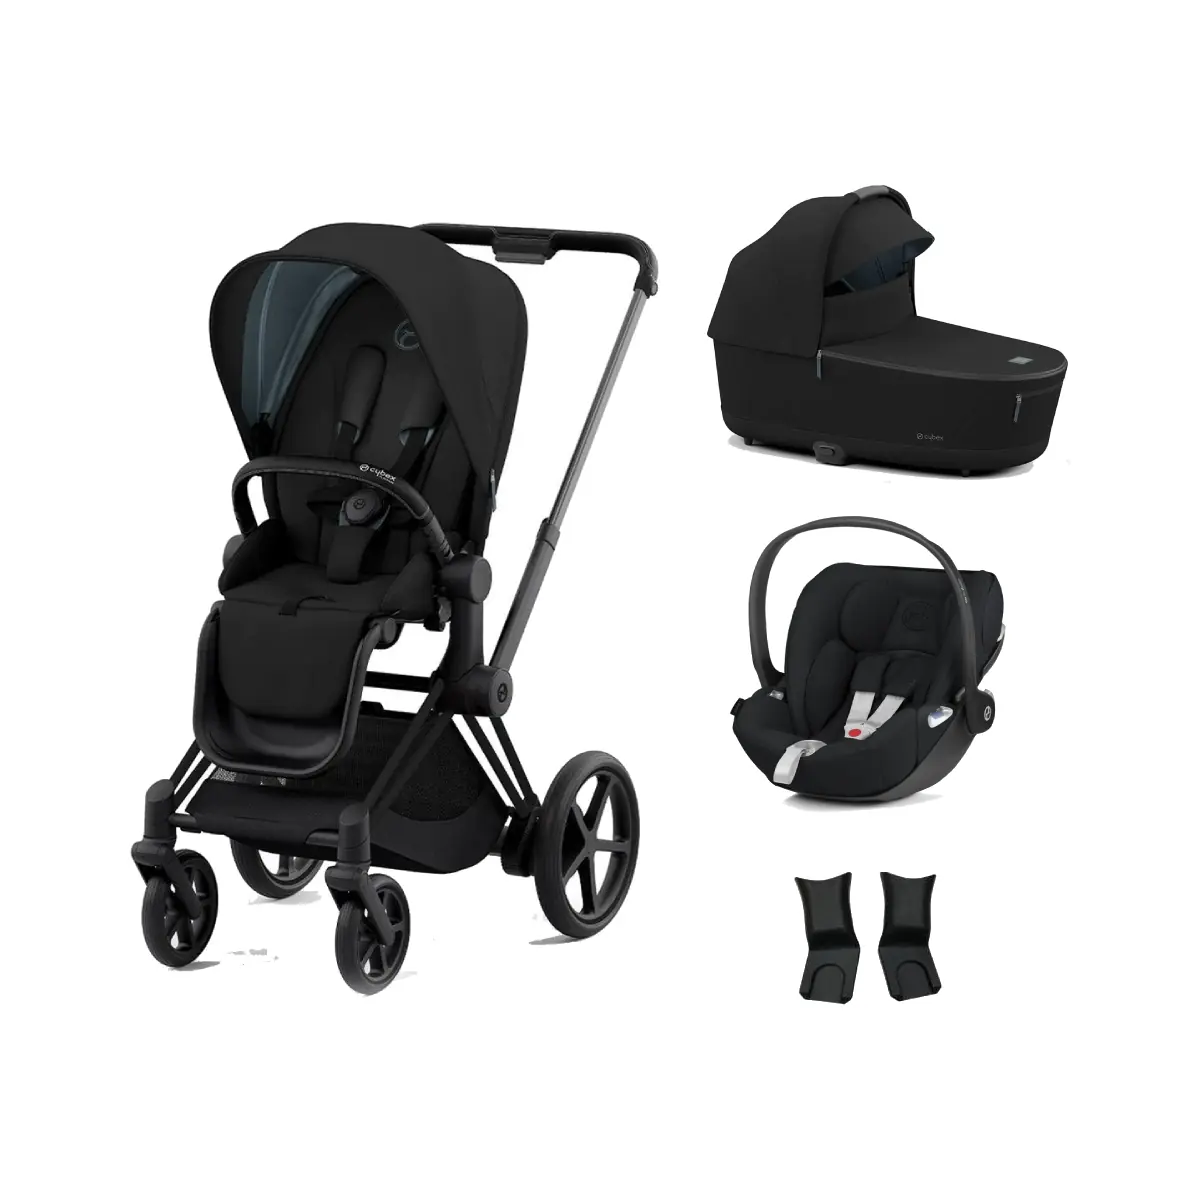 lv baby car seat covers,Save up to 15%